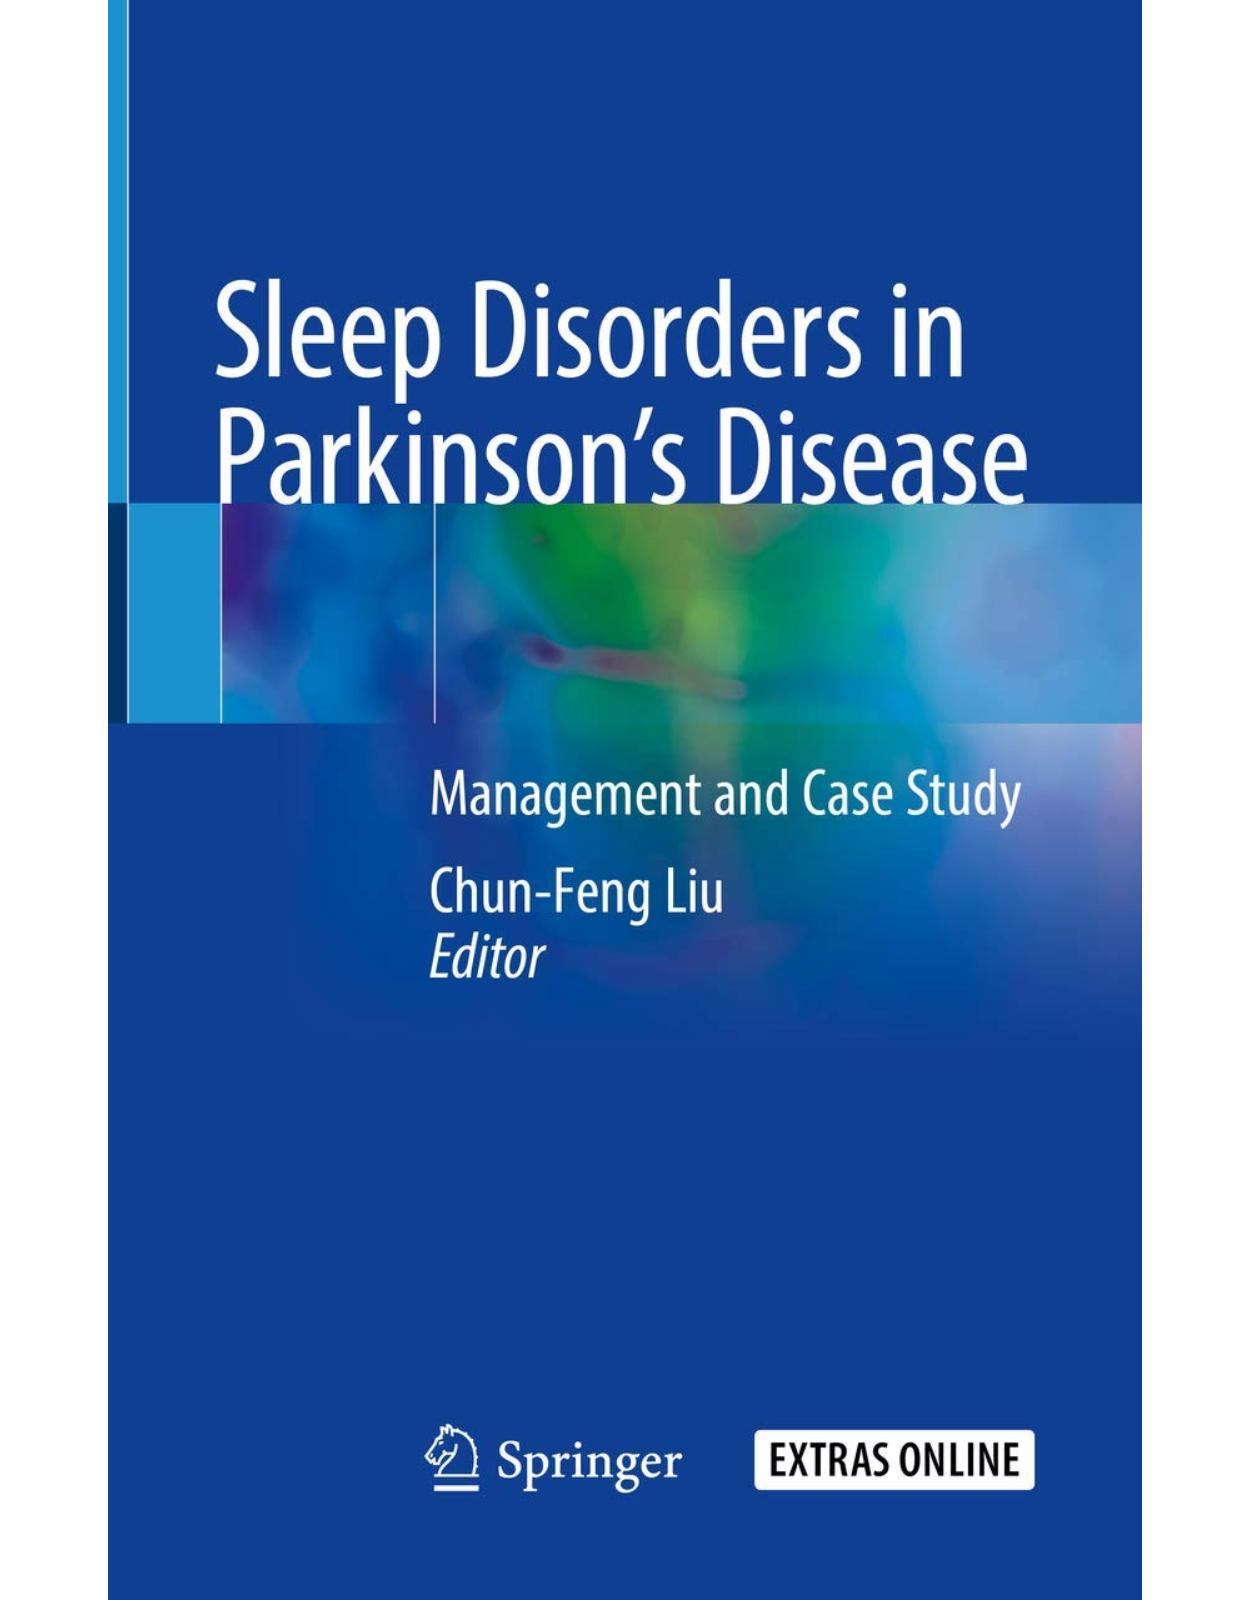 Sleep Disorders in Parkinson’s Disease: Management and Case Study